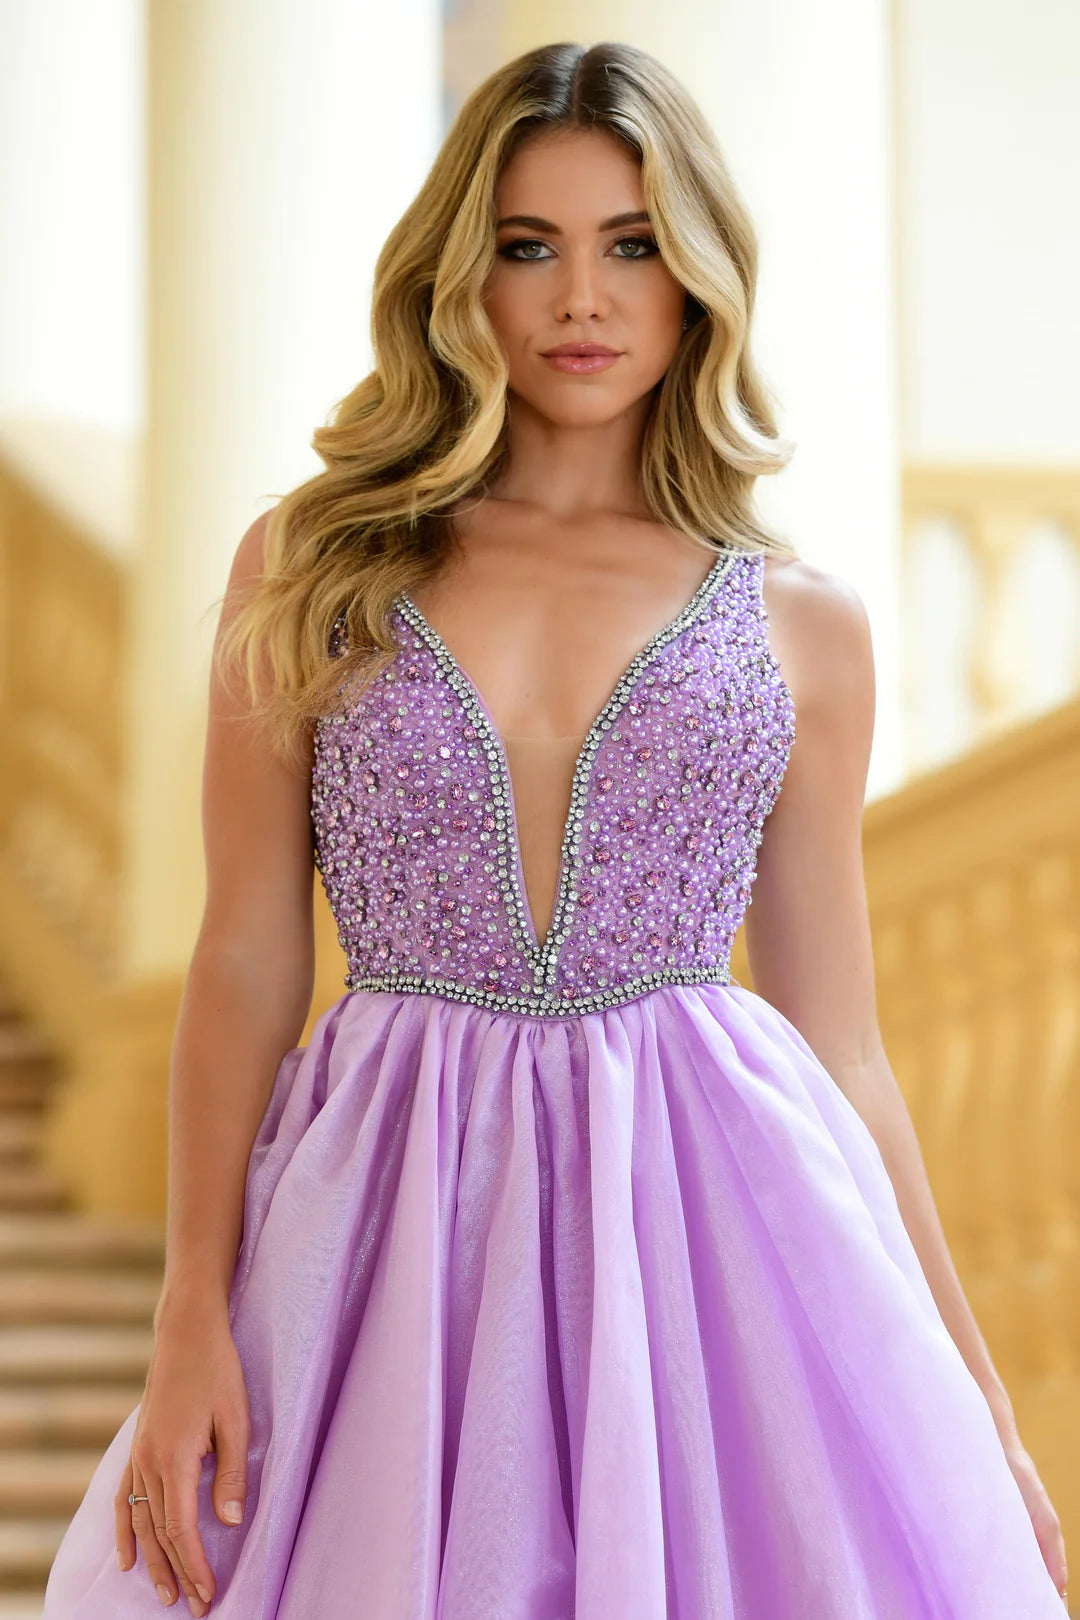 The Ava Presley 38342 A Line Beaded V Neck Ballgown is the perfect choice for your next pageant, prom, or formal event. With stunning beaded detailing and a flattering A line silhouette, this gown will turn heads and make you feel like a true queen. The V neck adds an elegant touch, while the train adds a touch of drama. Make a statement with this gorgeous dress.  Sizes: 00-16  Colors: Lilac, White, Ice Blue, Periwinkle